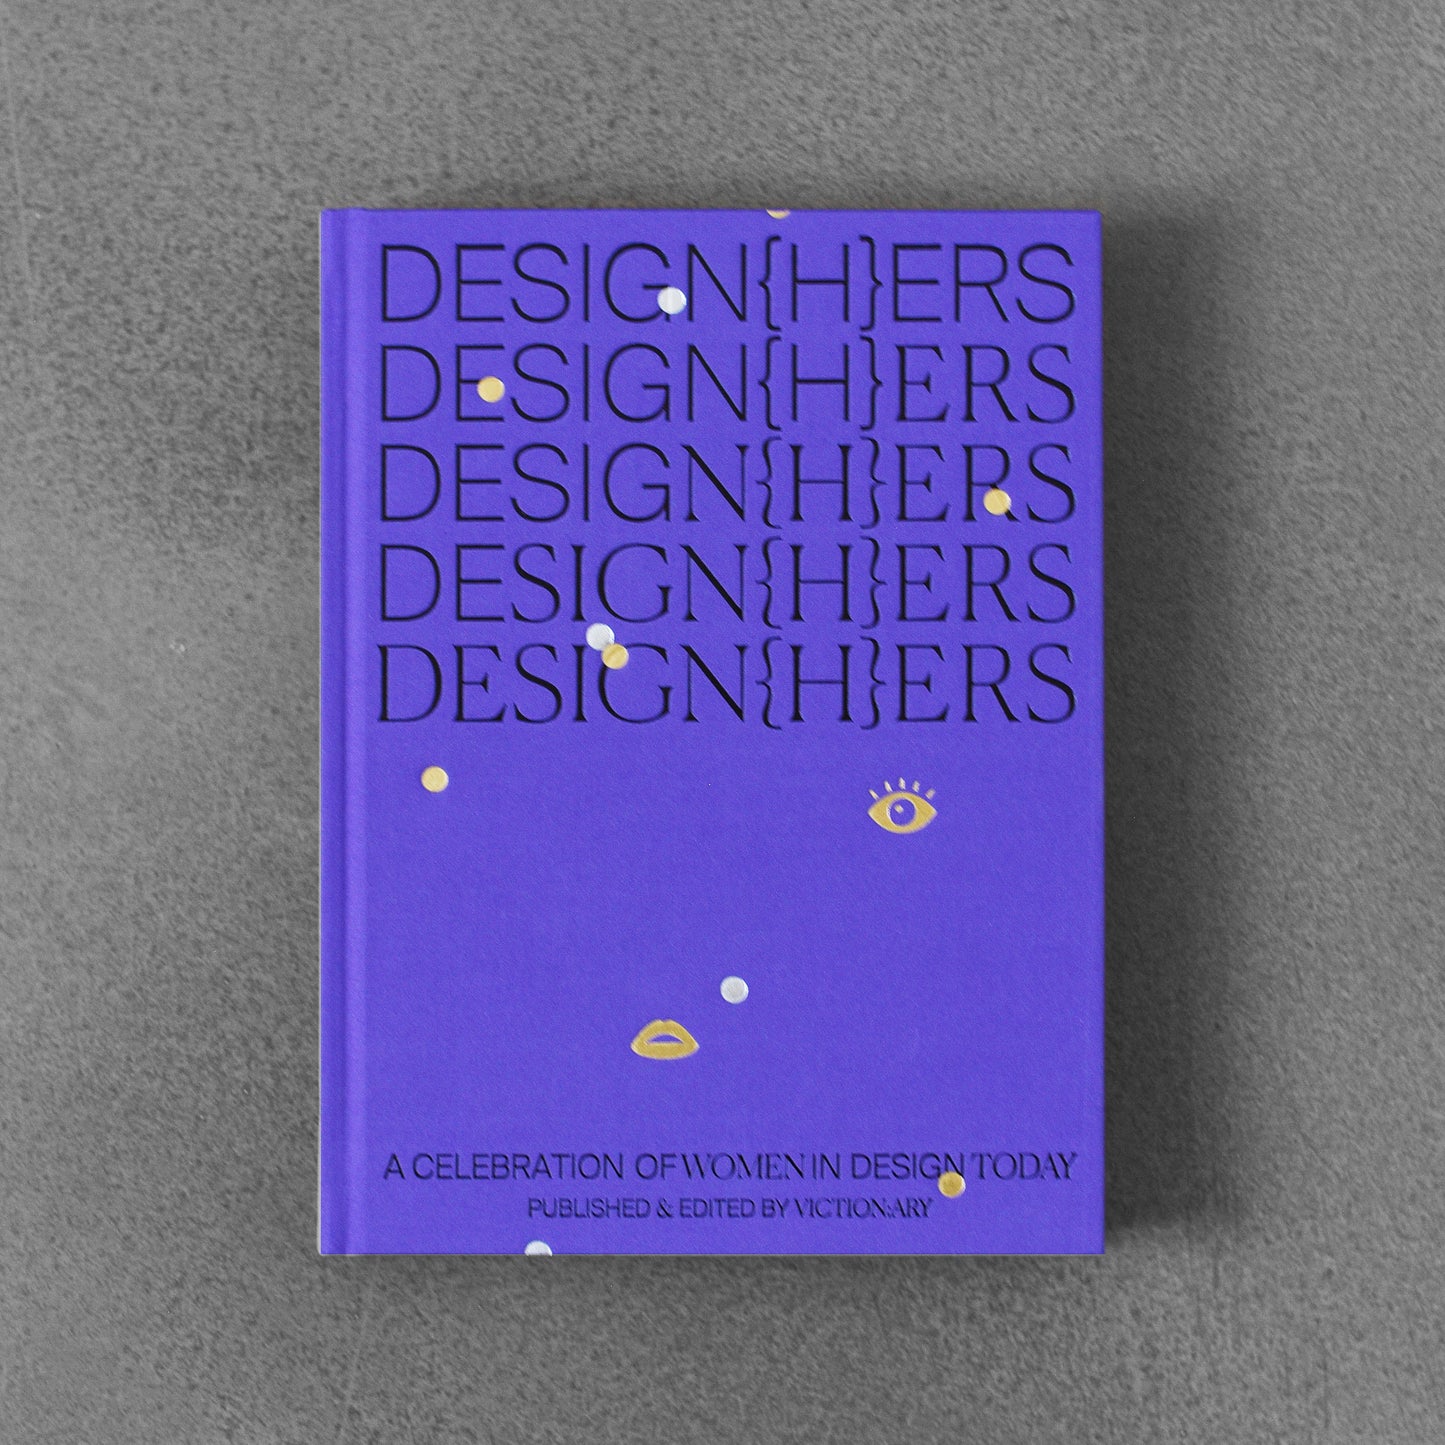 DESIGN{H}ERS: A Celebration of Woman in Design